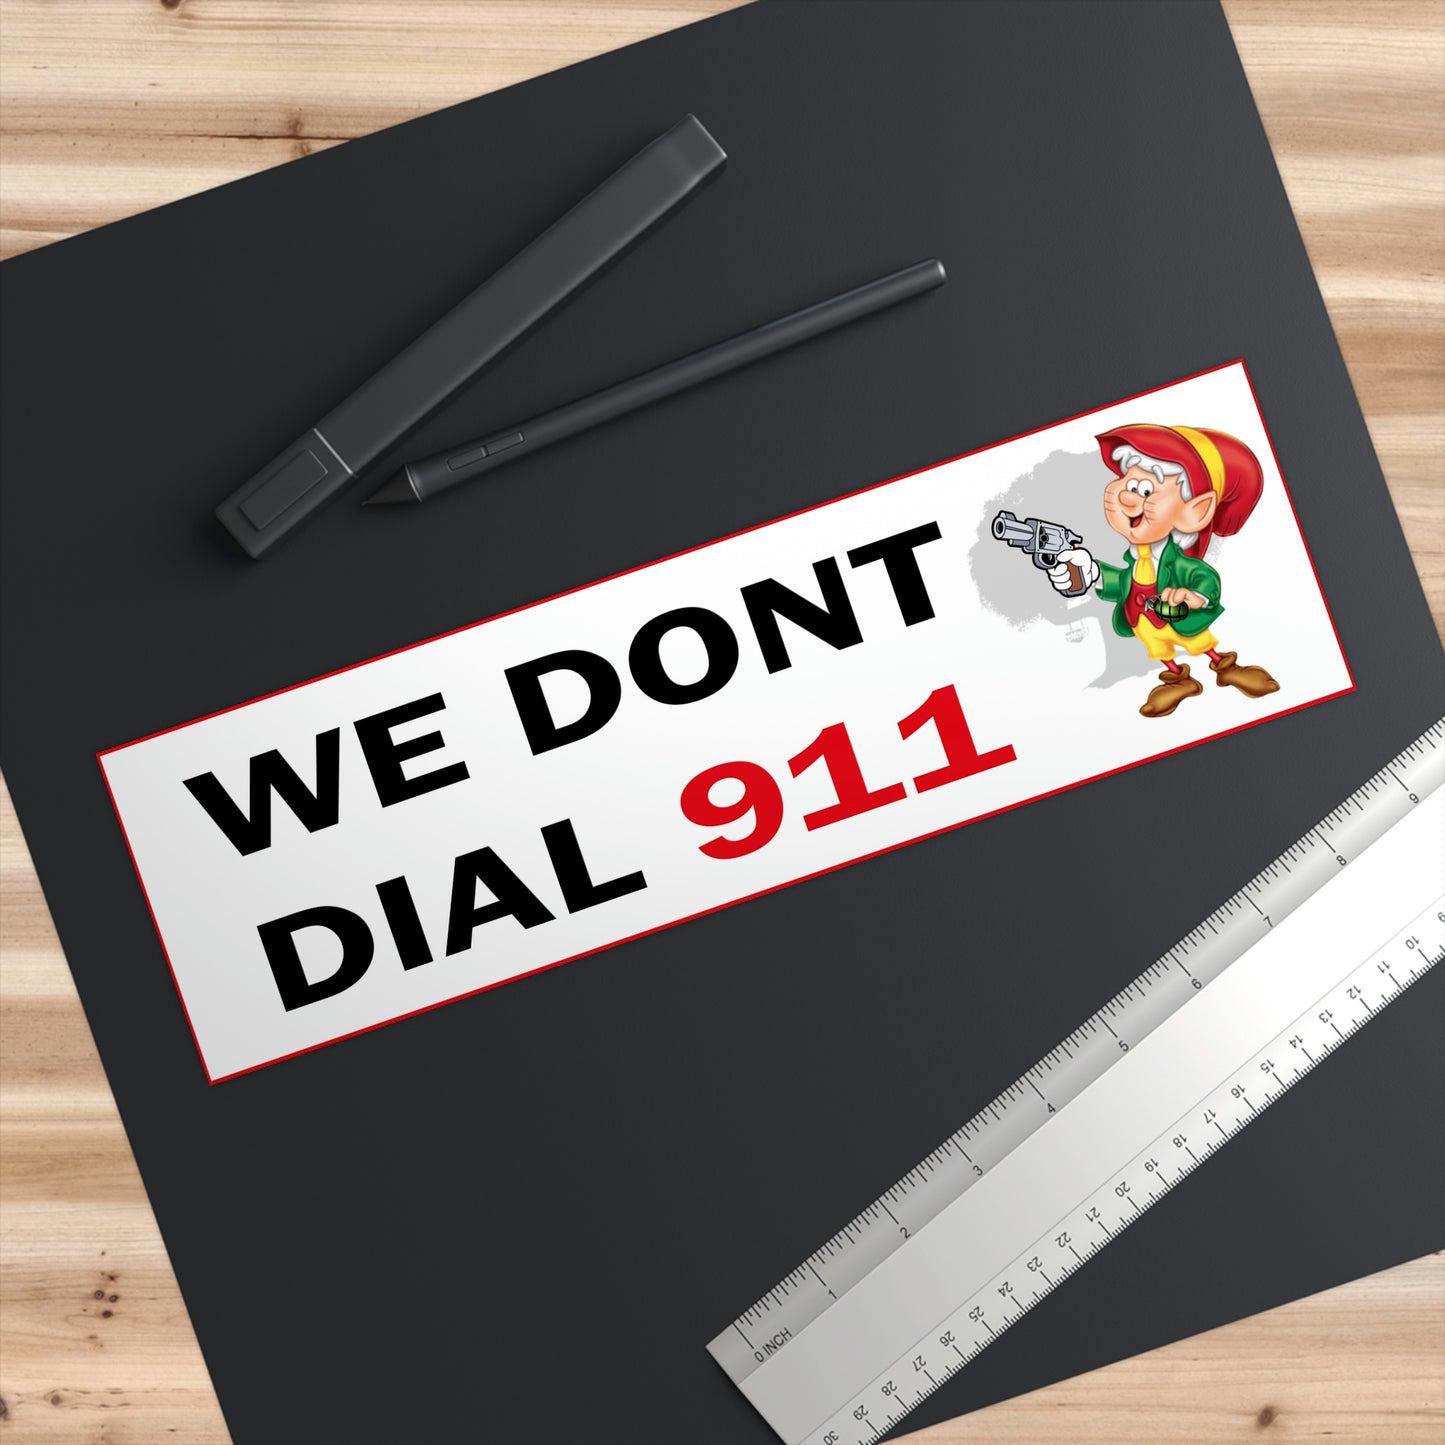 We dont dial 911